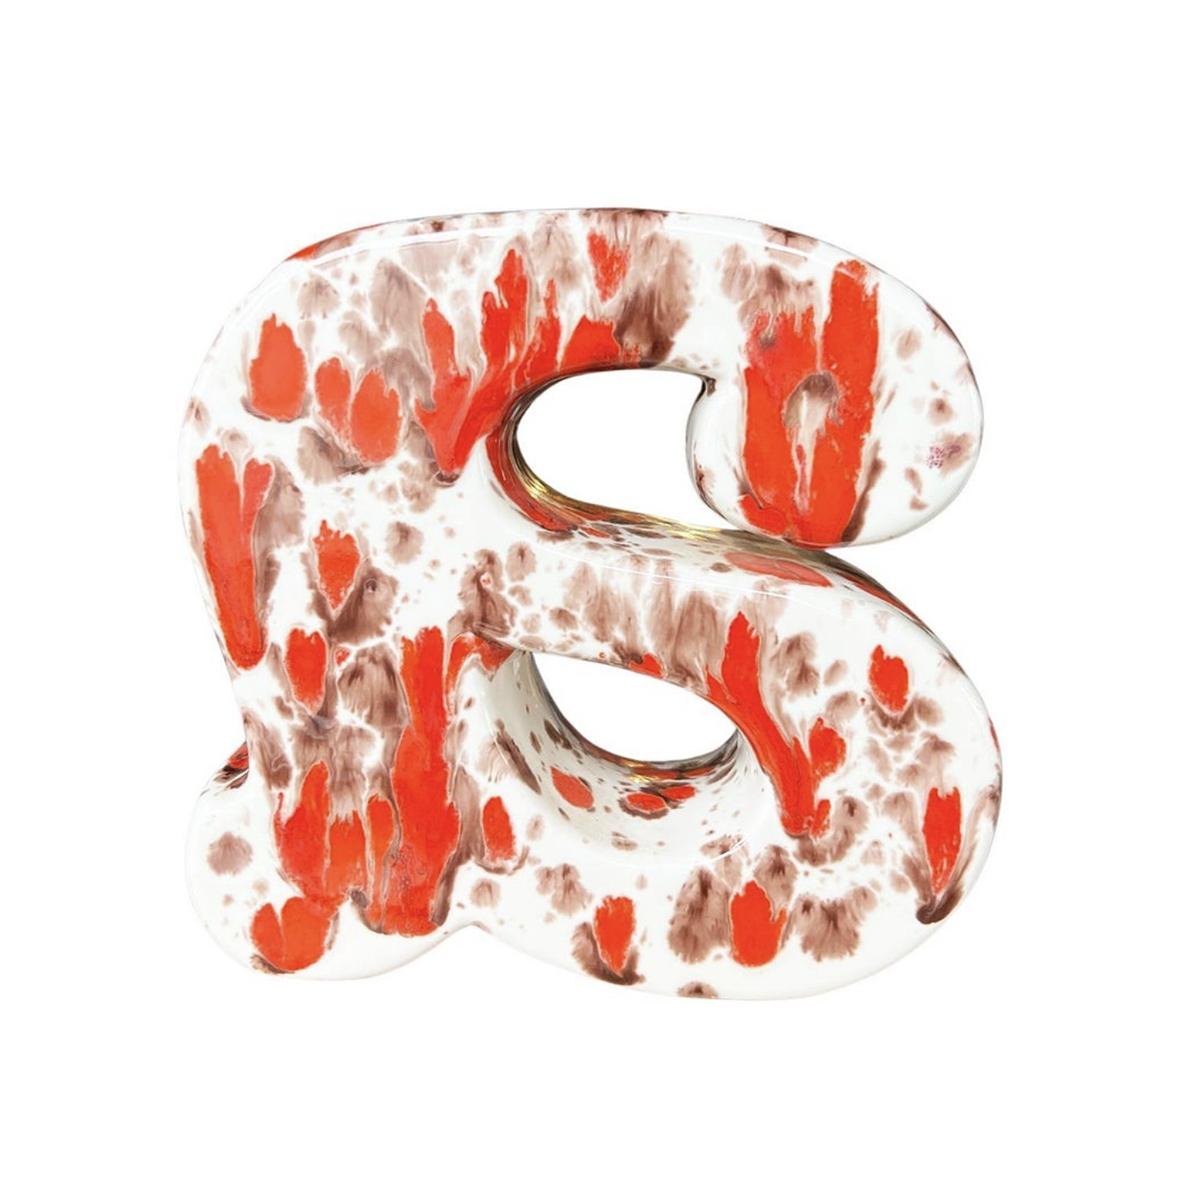 Ceramic Lowercase Letter A Splatter Painted Bookend in Orange and Brown - 1981 In Good Condition For Sale In Oklahoma City, OK